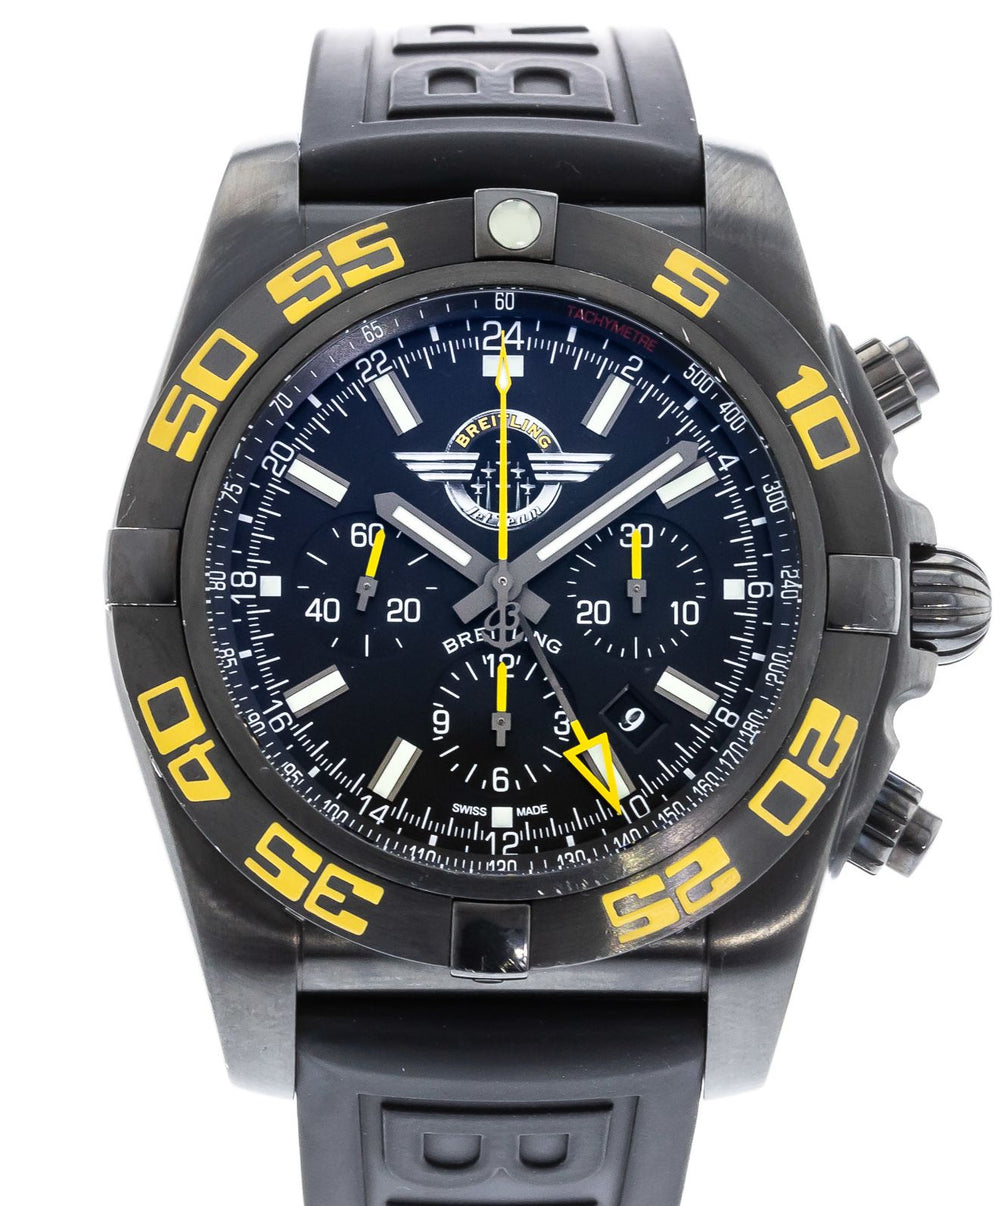 Breitling Chronomat GMT Jet Team American Tour Limited Edition MB0410 1